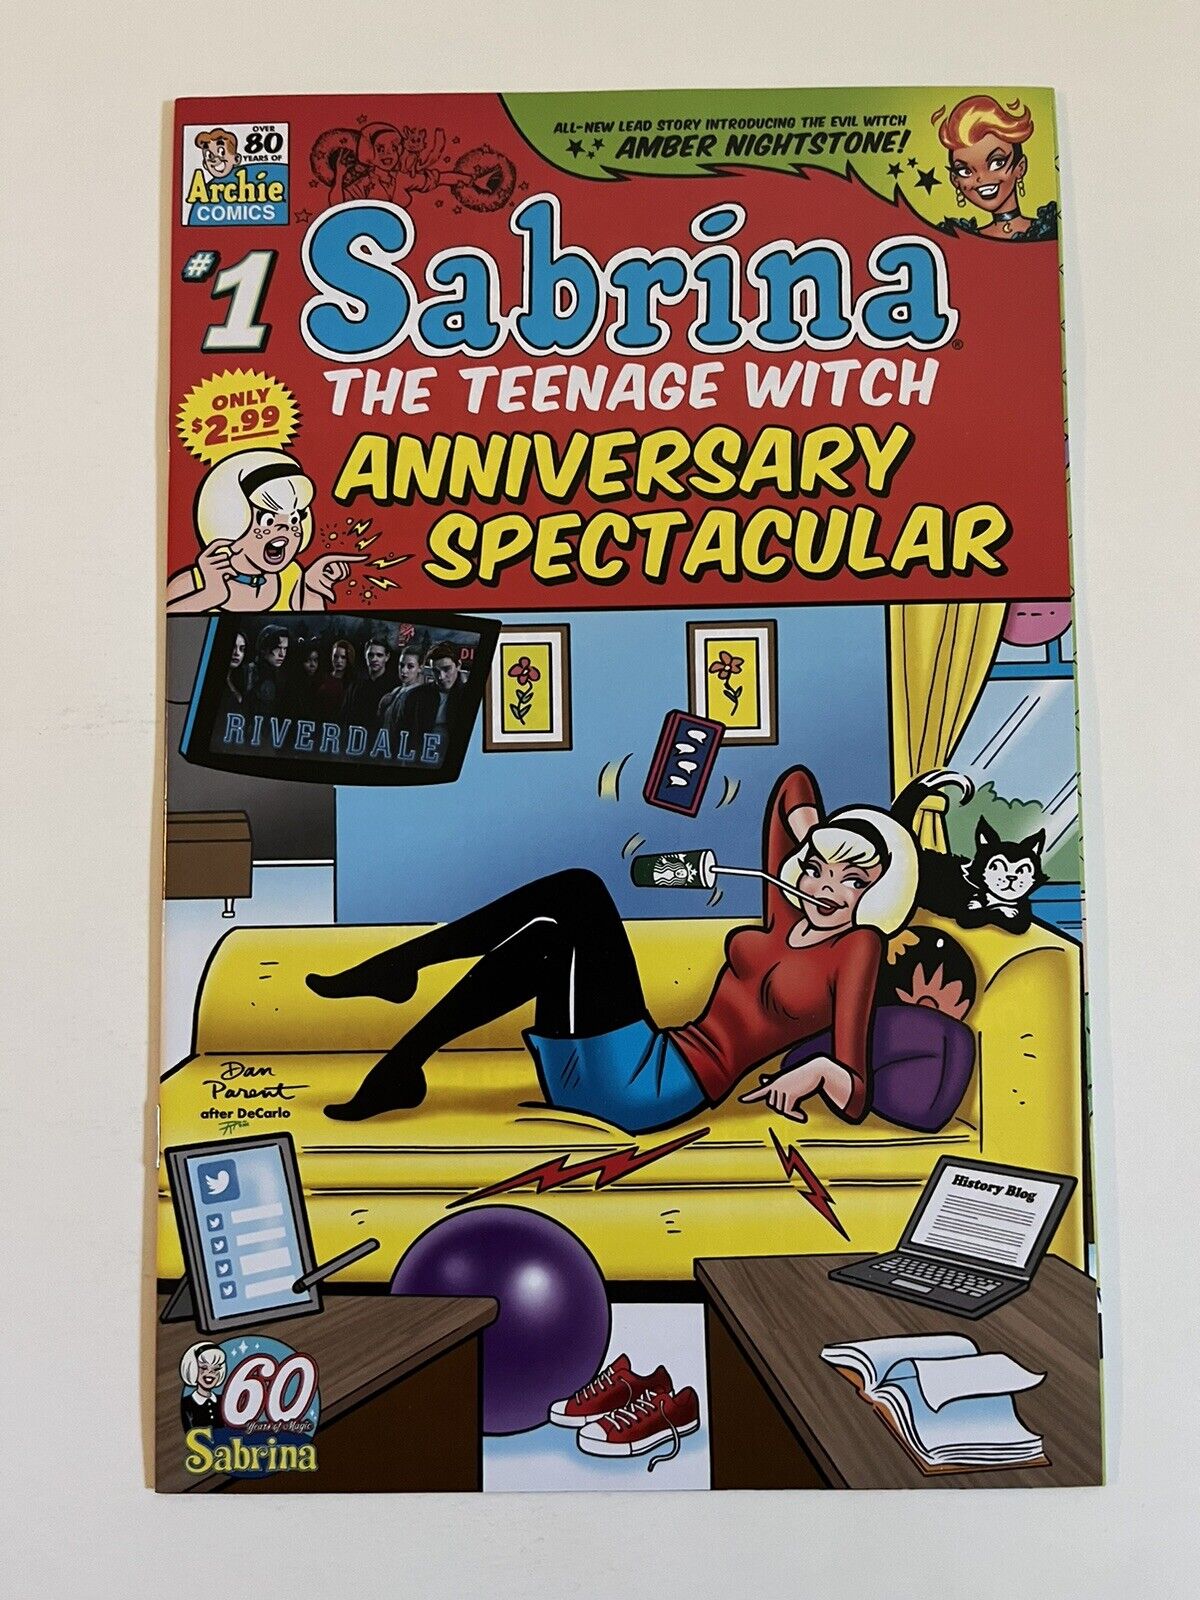 SABRINA THE TEENAGE WITCH ANNIVERSARY SPECTACULAR #1 Archie Comic 2022 (04/15)